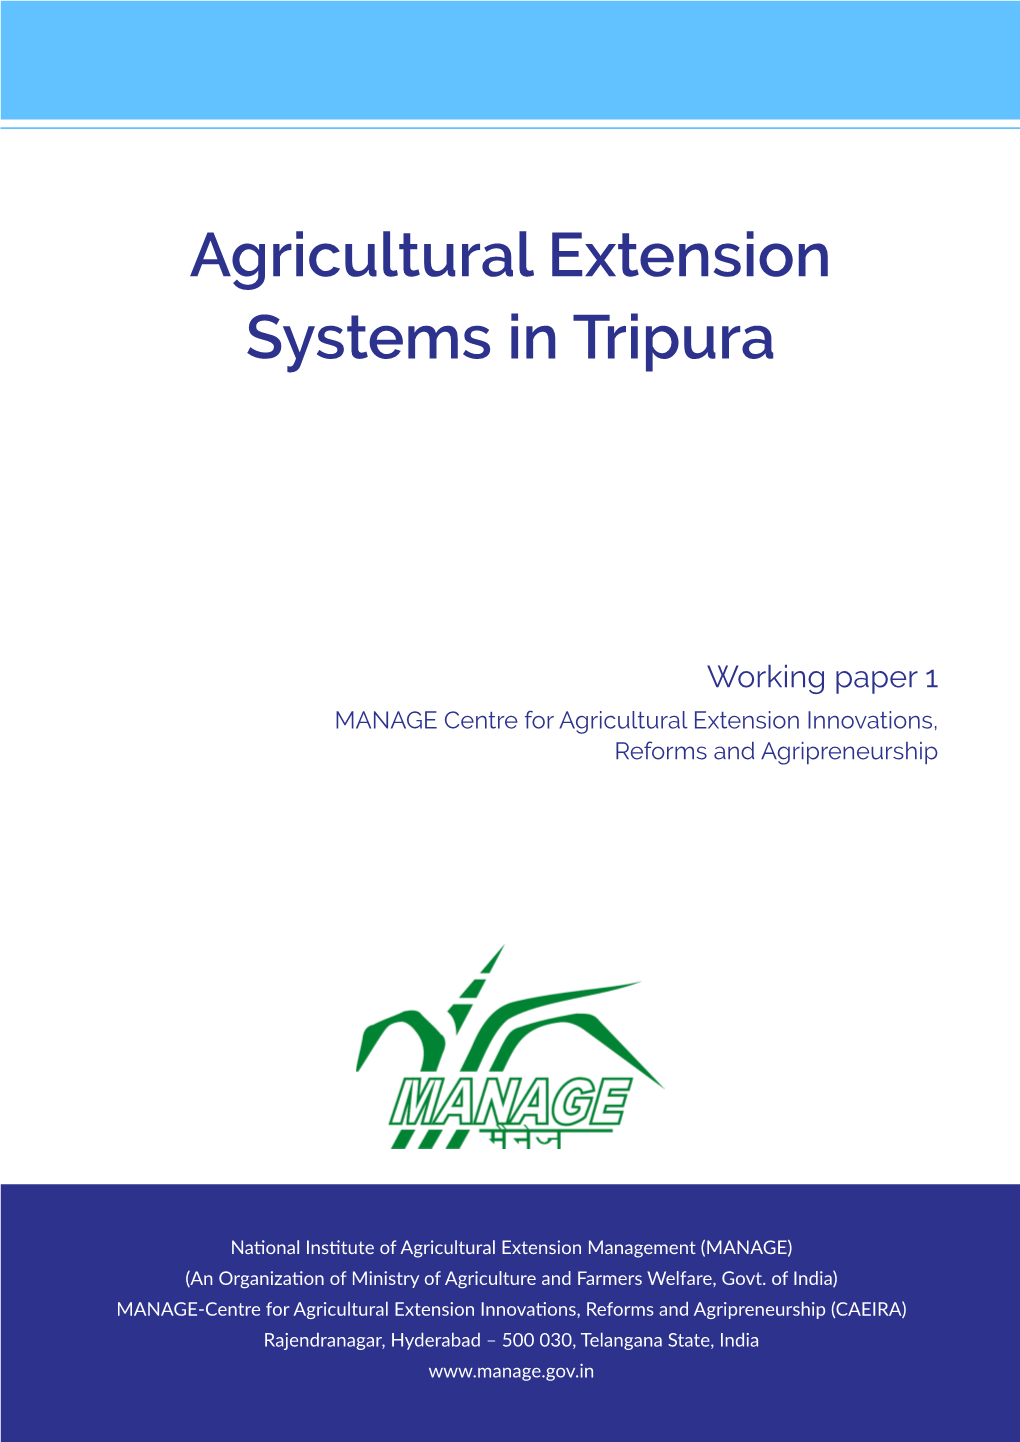 Agricultural Extension Systems in Tripura